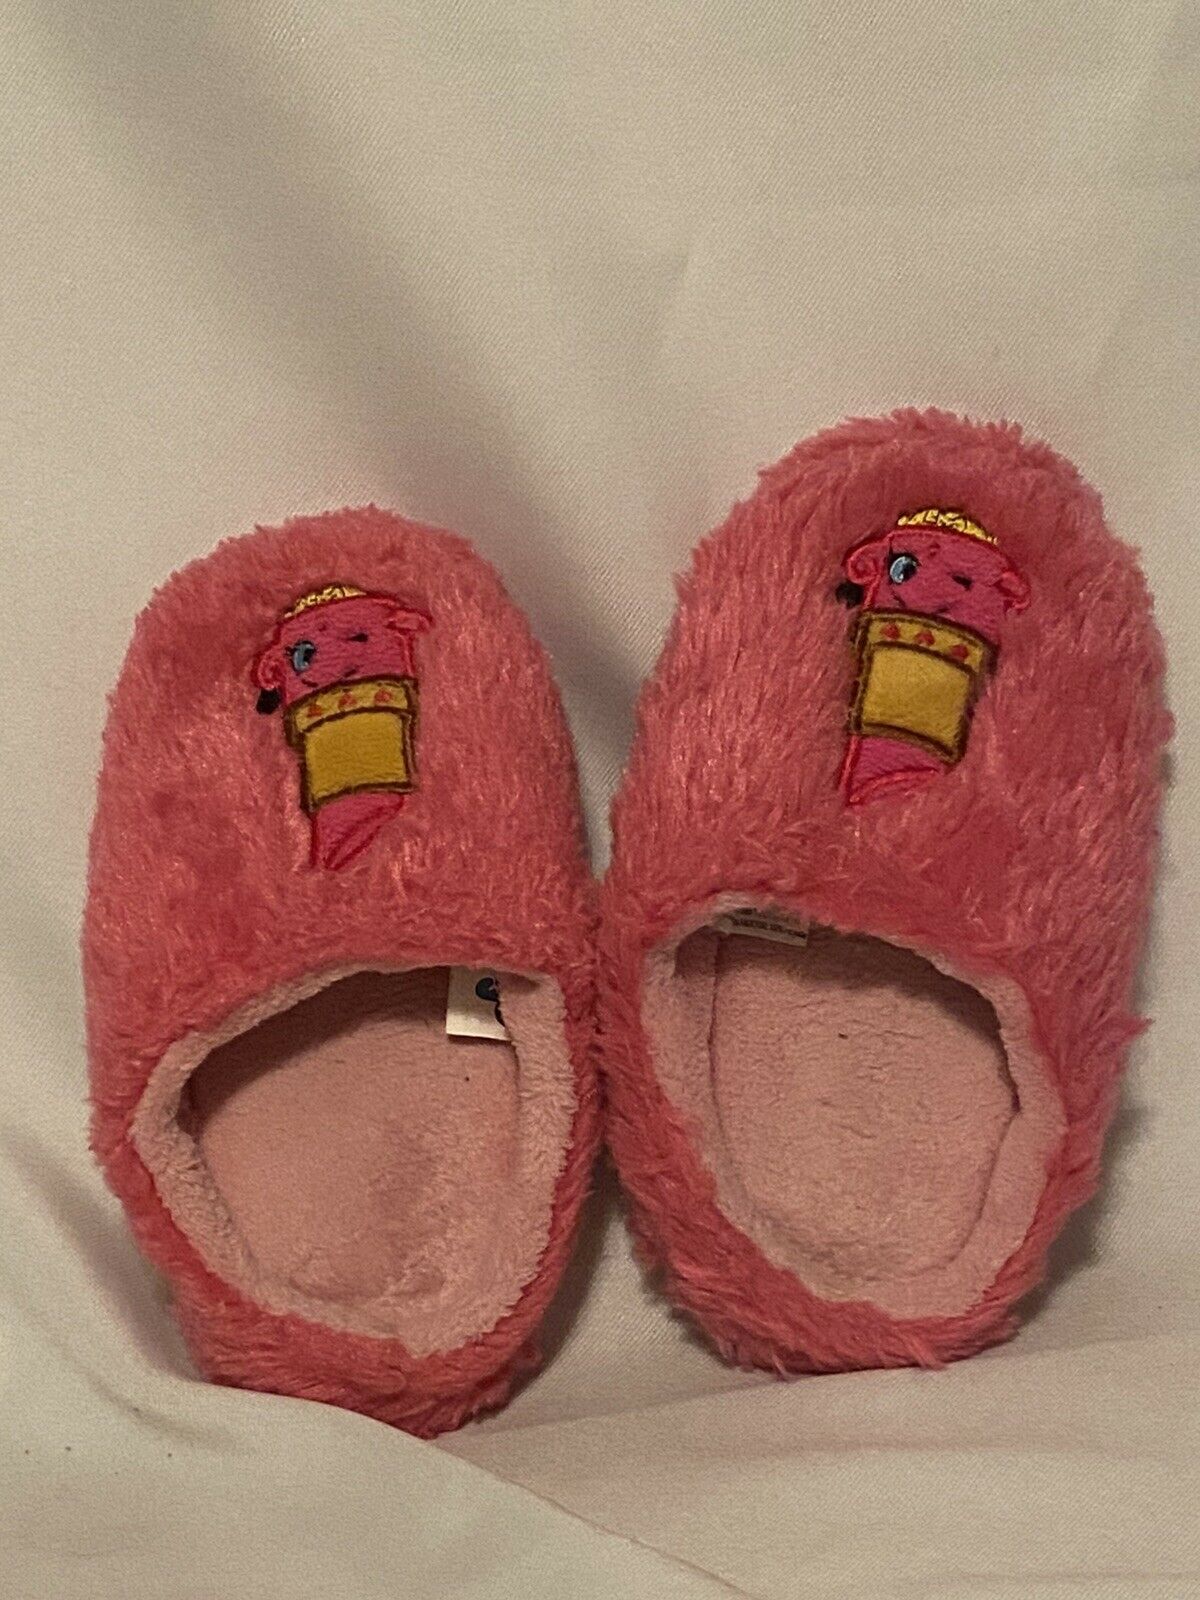 Shopkins Slippers Toddler Girl’s Size 2-3 Pink Faux Fur Trim Shopkins Characters - $7.99